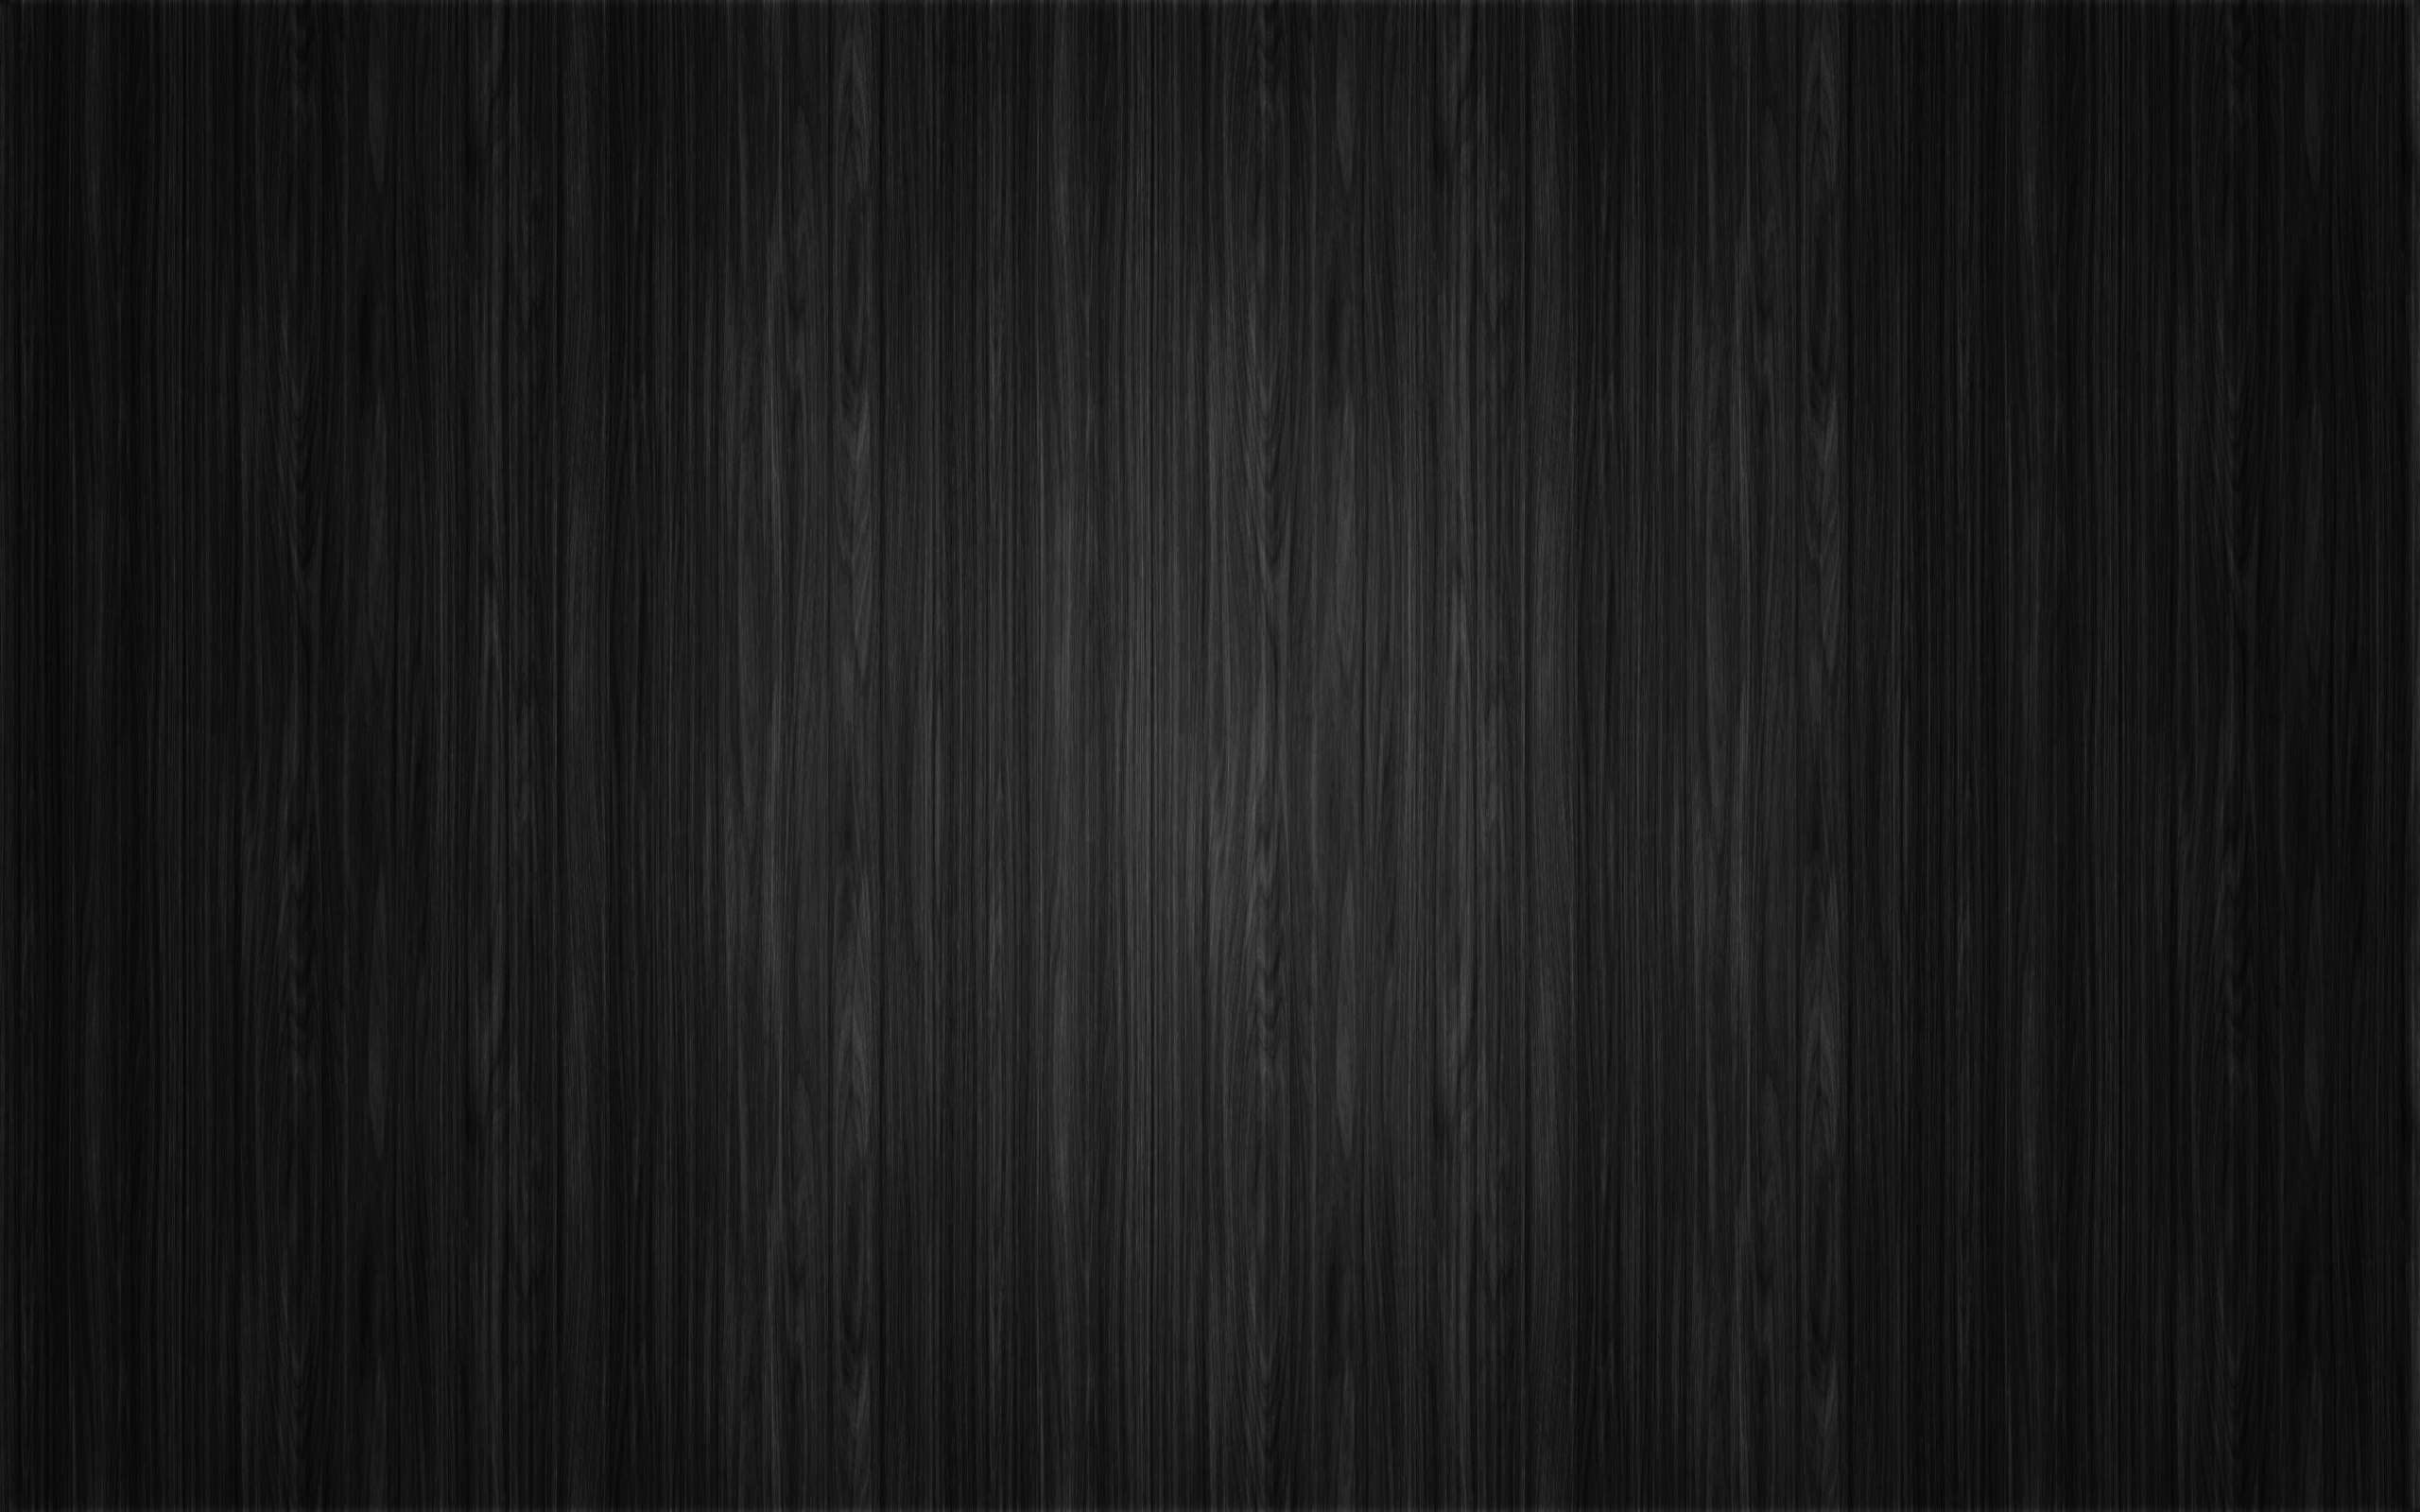  wallpaper background black abstract